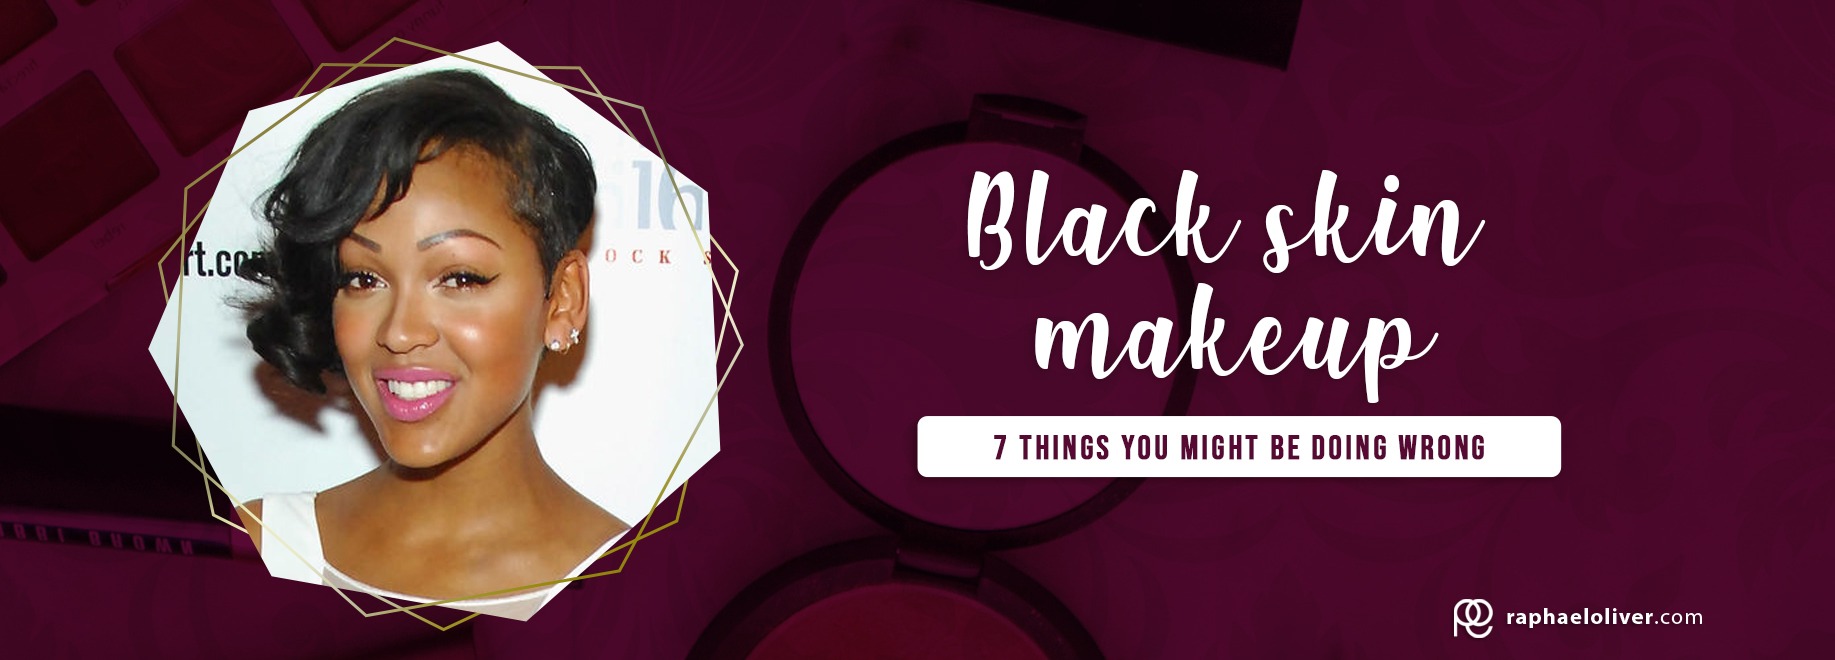 Black skin makeup: 7 things you might be doing wrong